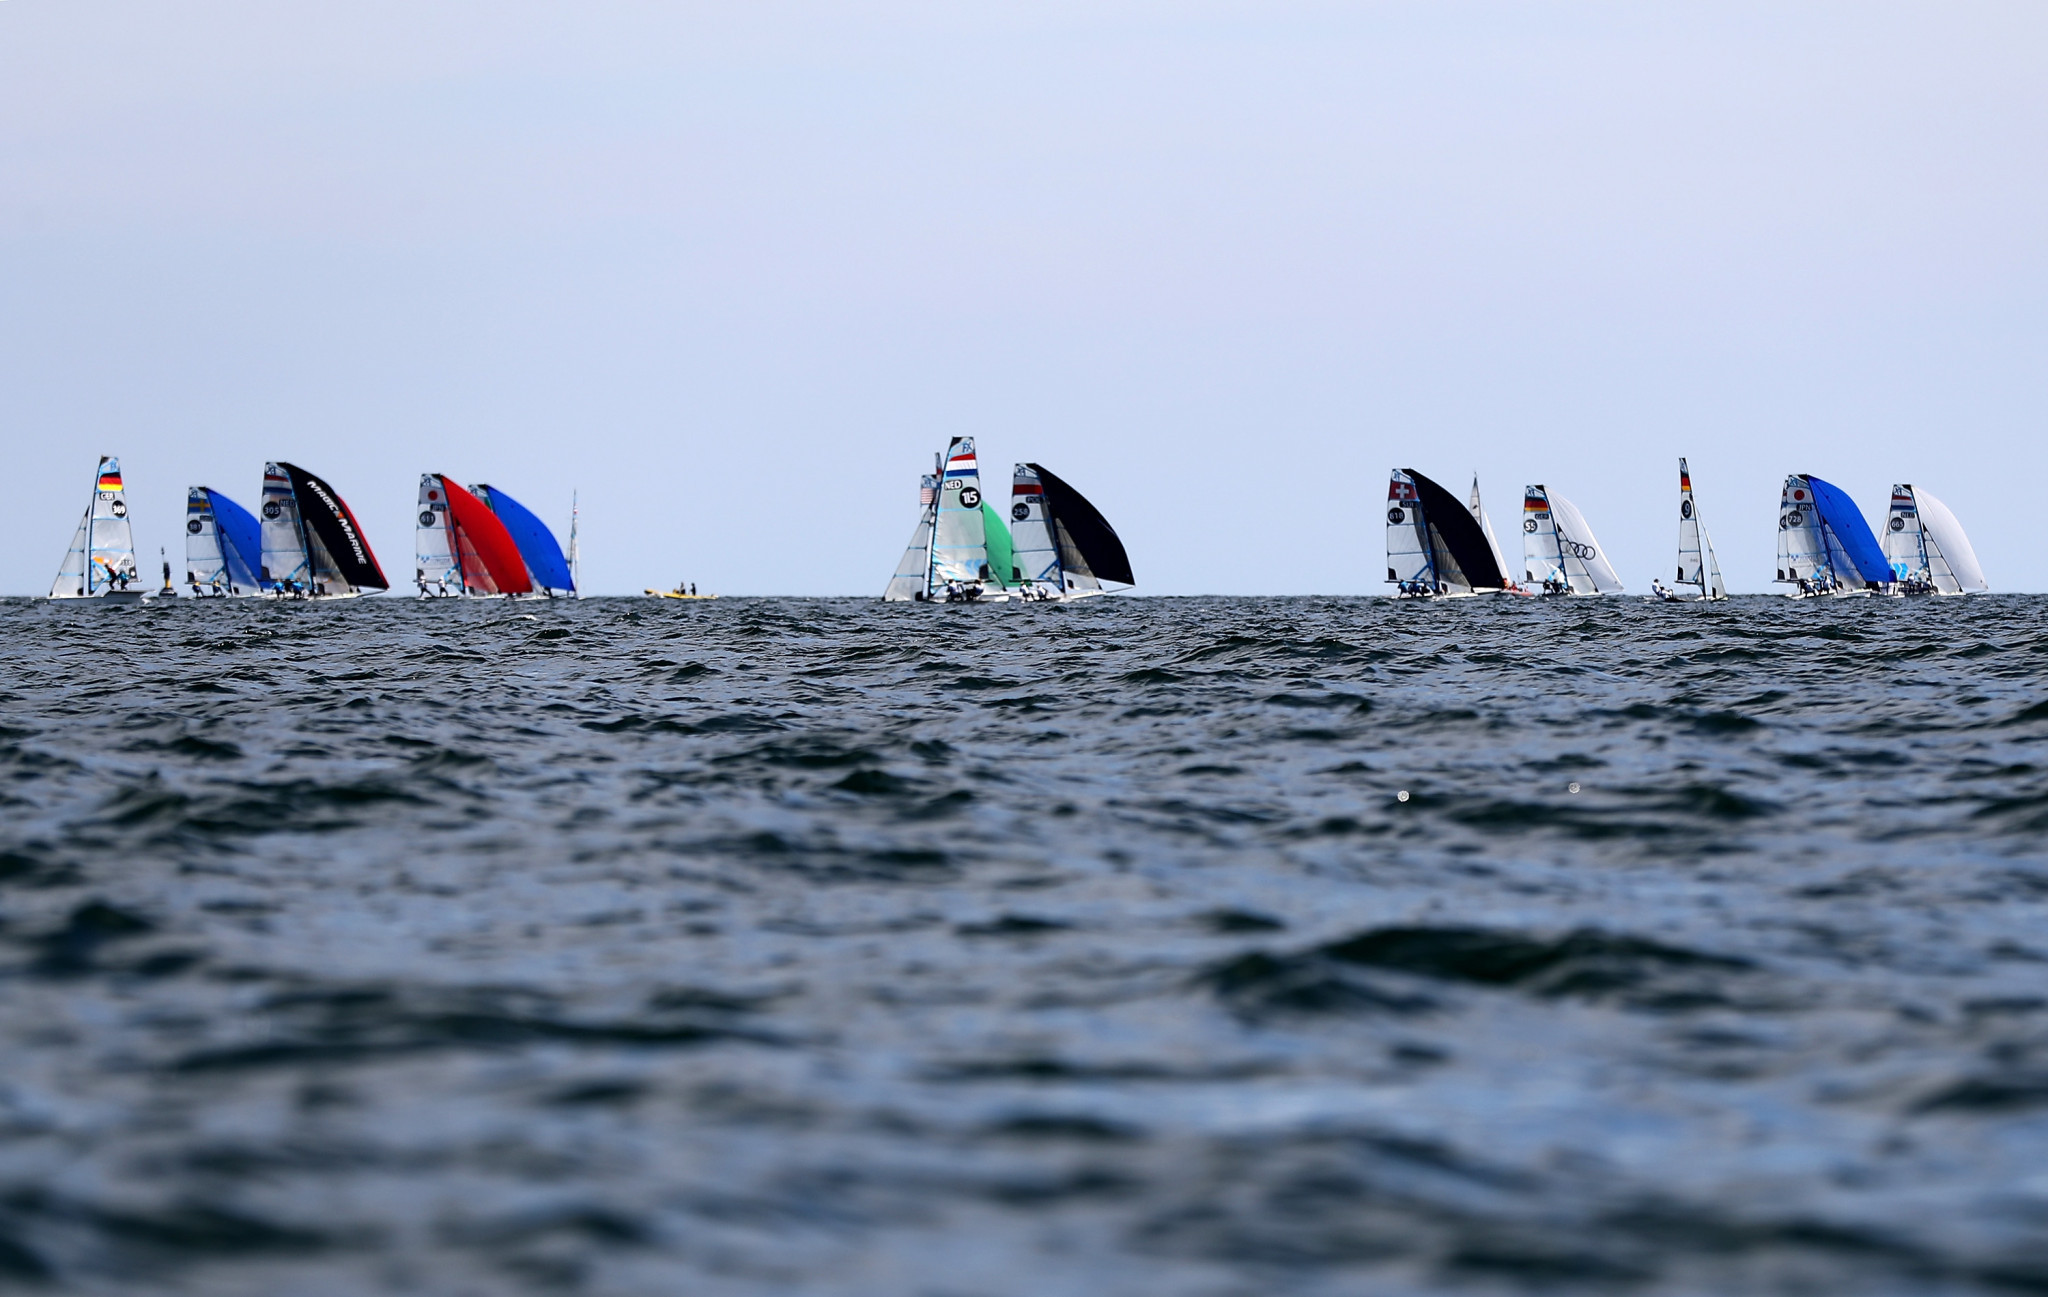 The Netherlands' Odile van Aanholt and Elise Ruyter retained their lead in the 49erFX competition ©Getty Images